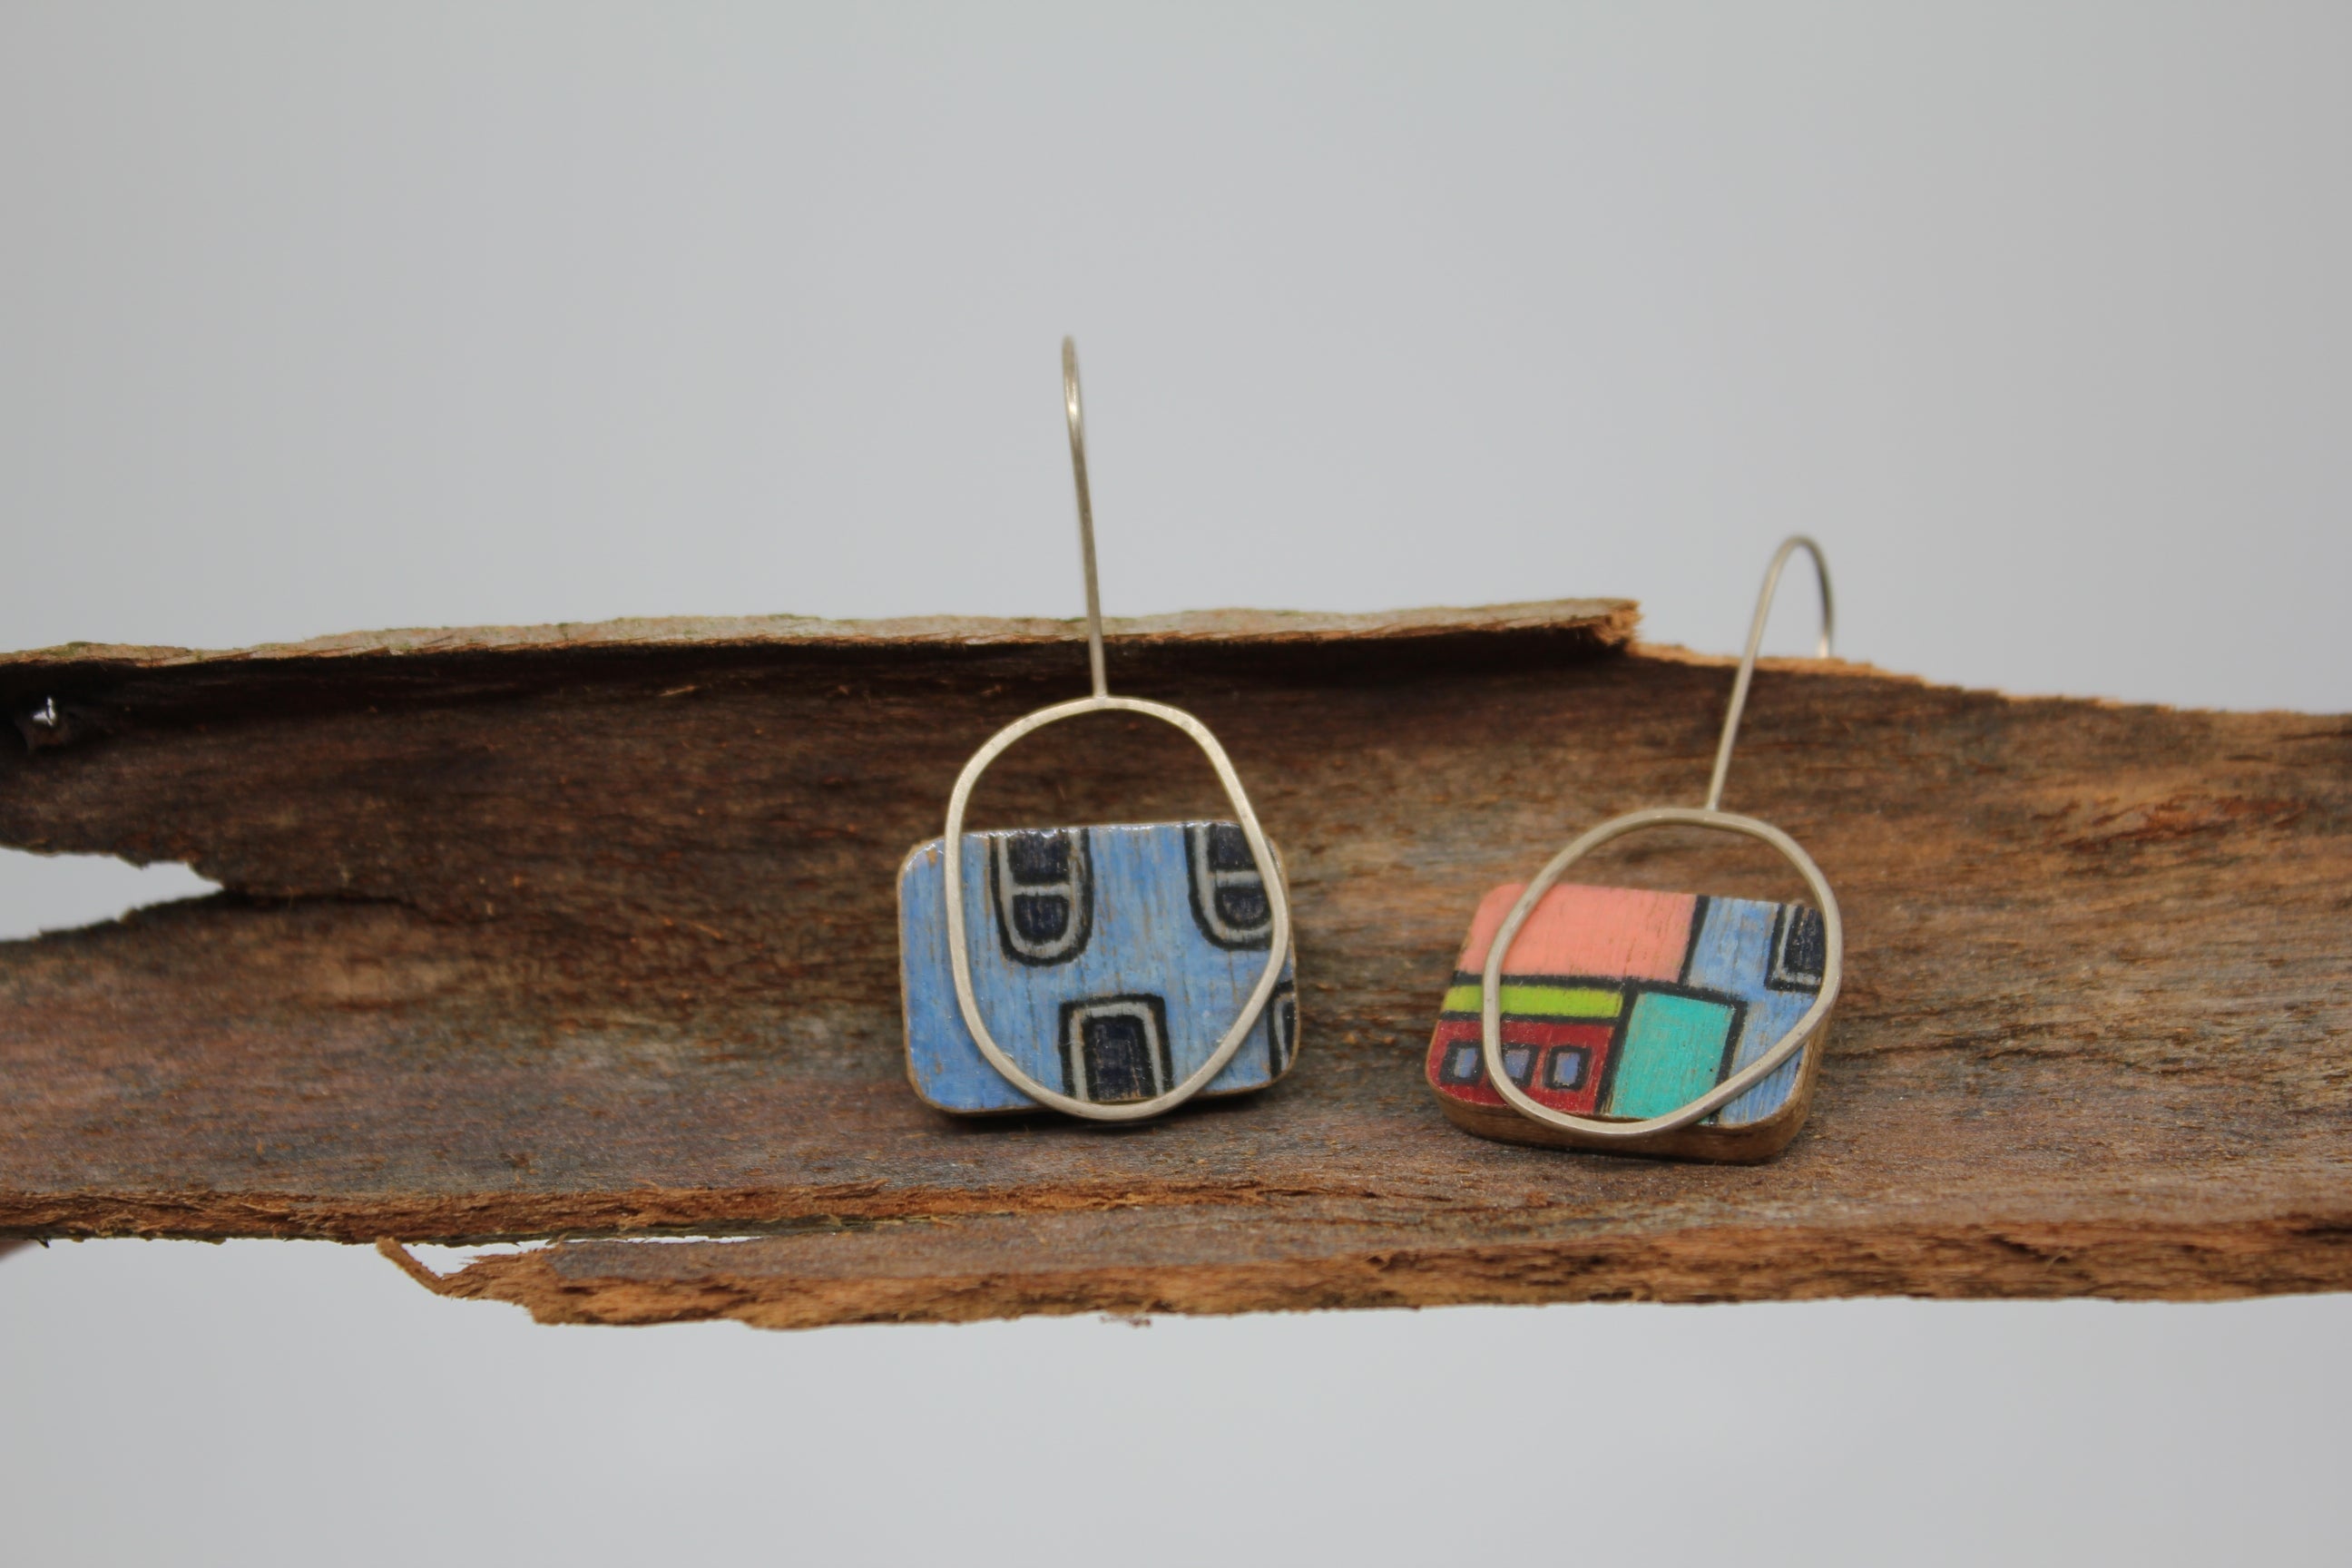 Painted Cityscape ply and silver Earrings